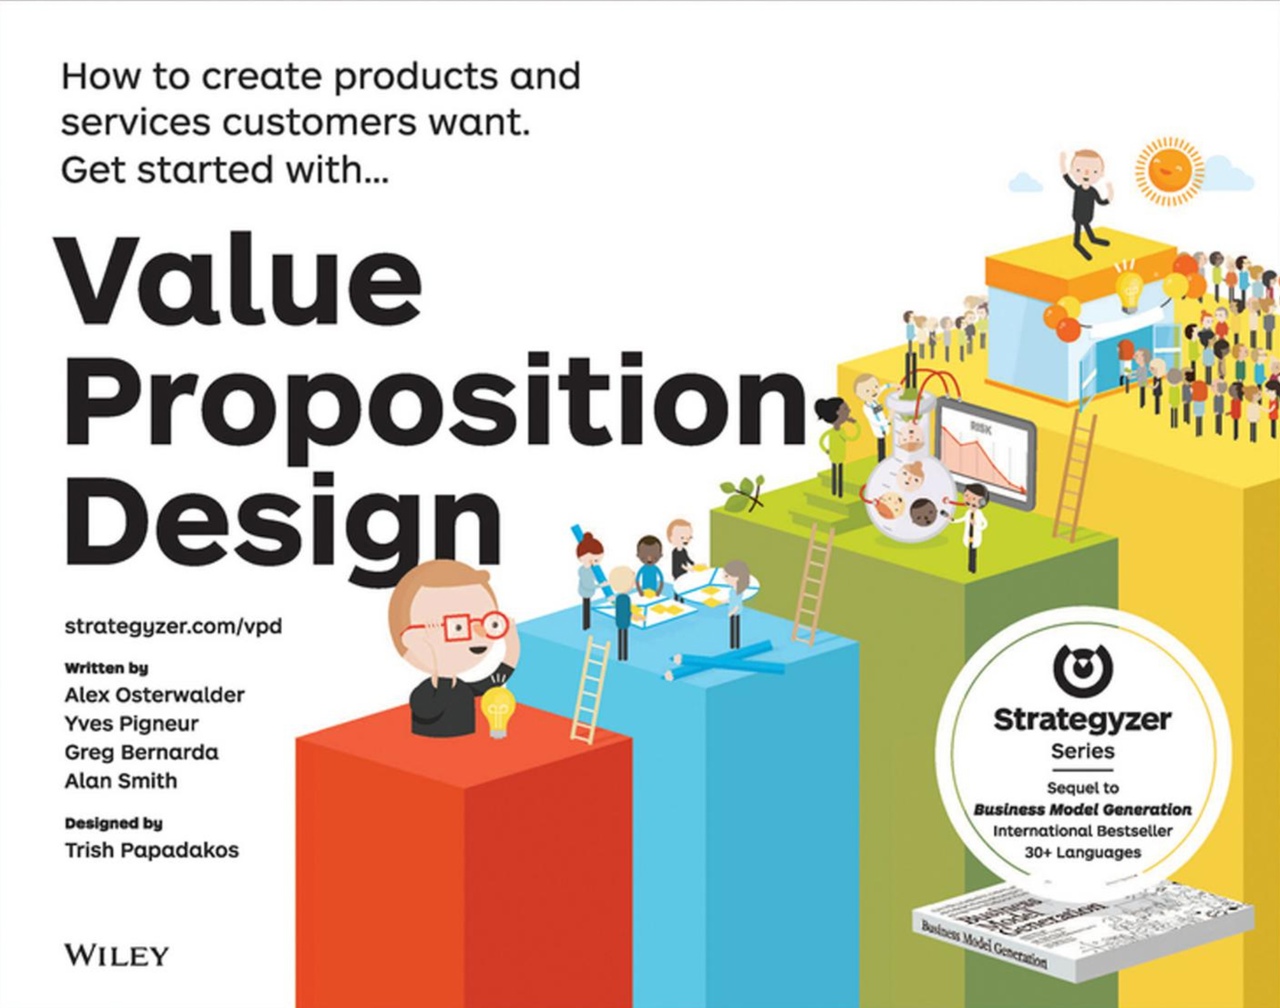 Value Proposition Design: How To Create Products And Services Customers Want (Osterwalder, 2014)